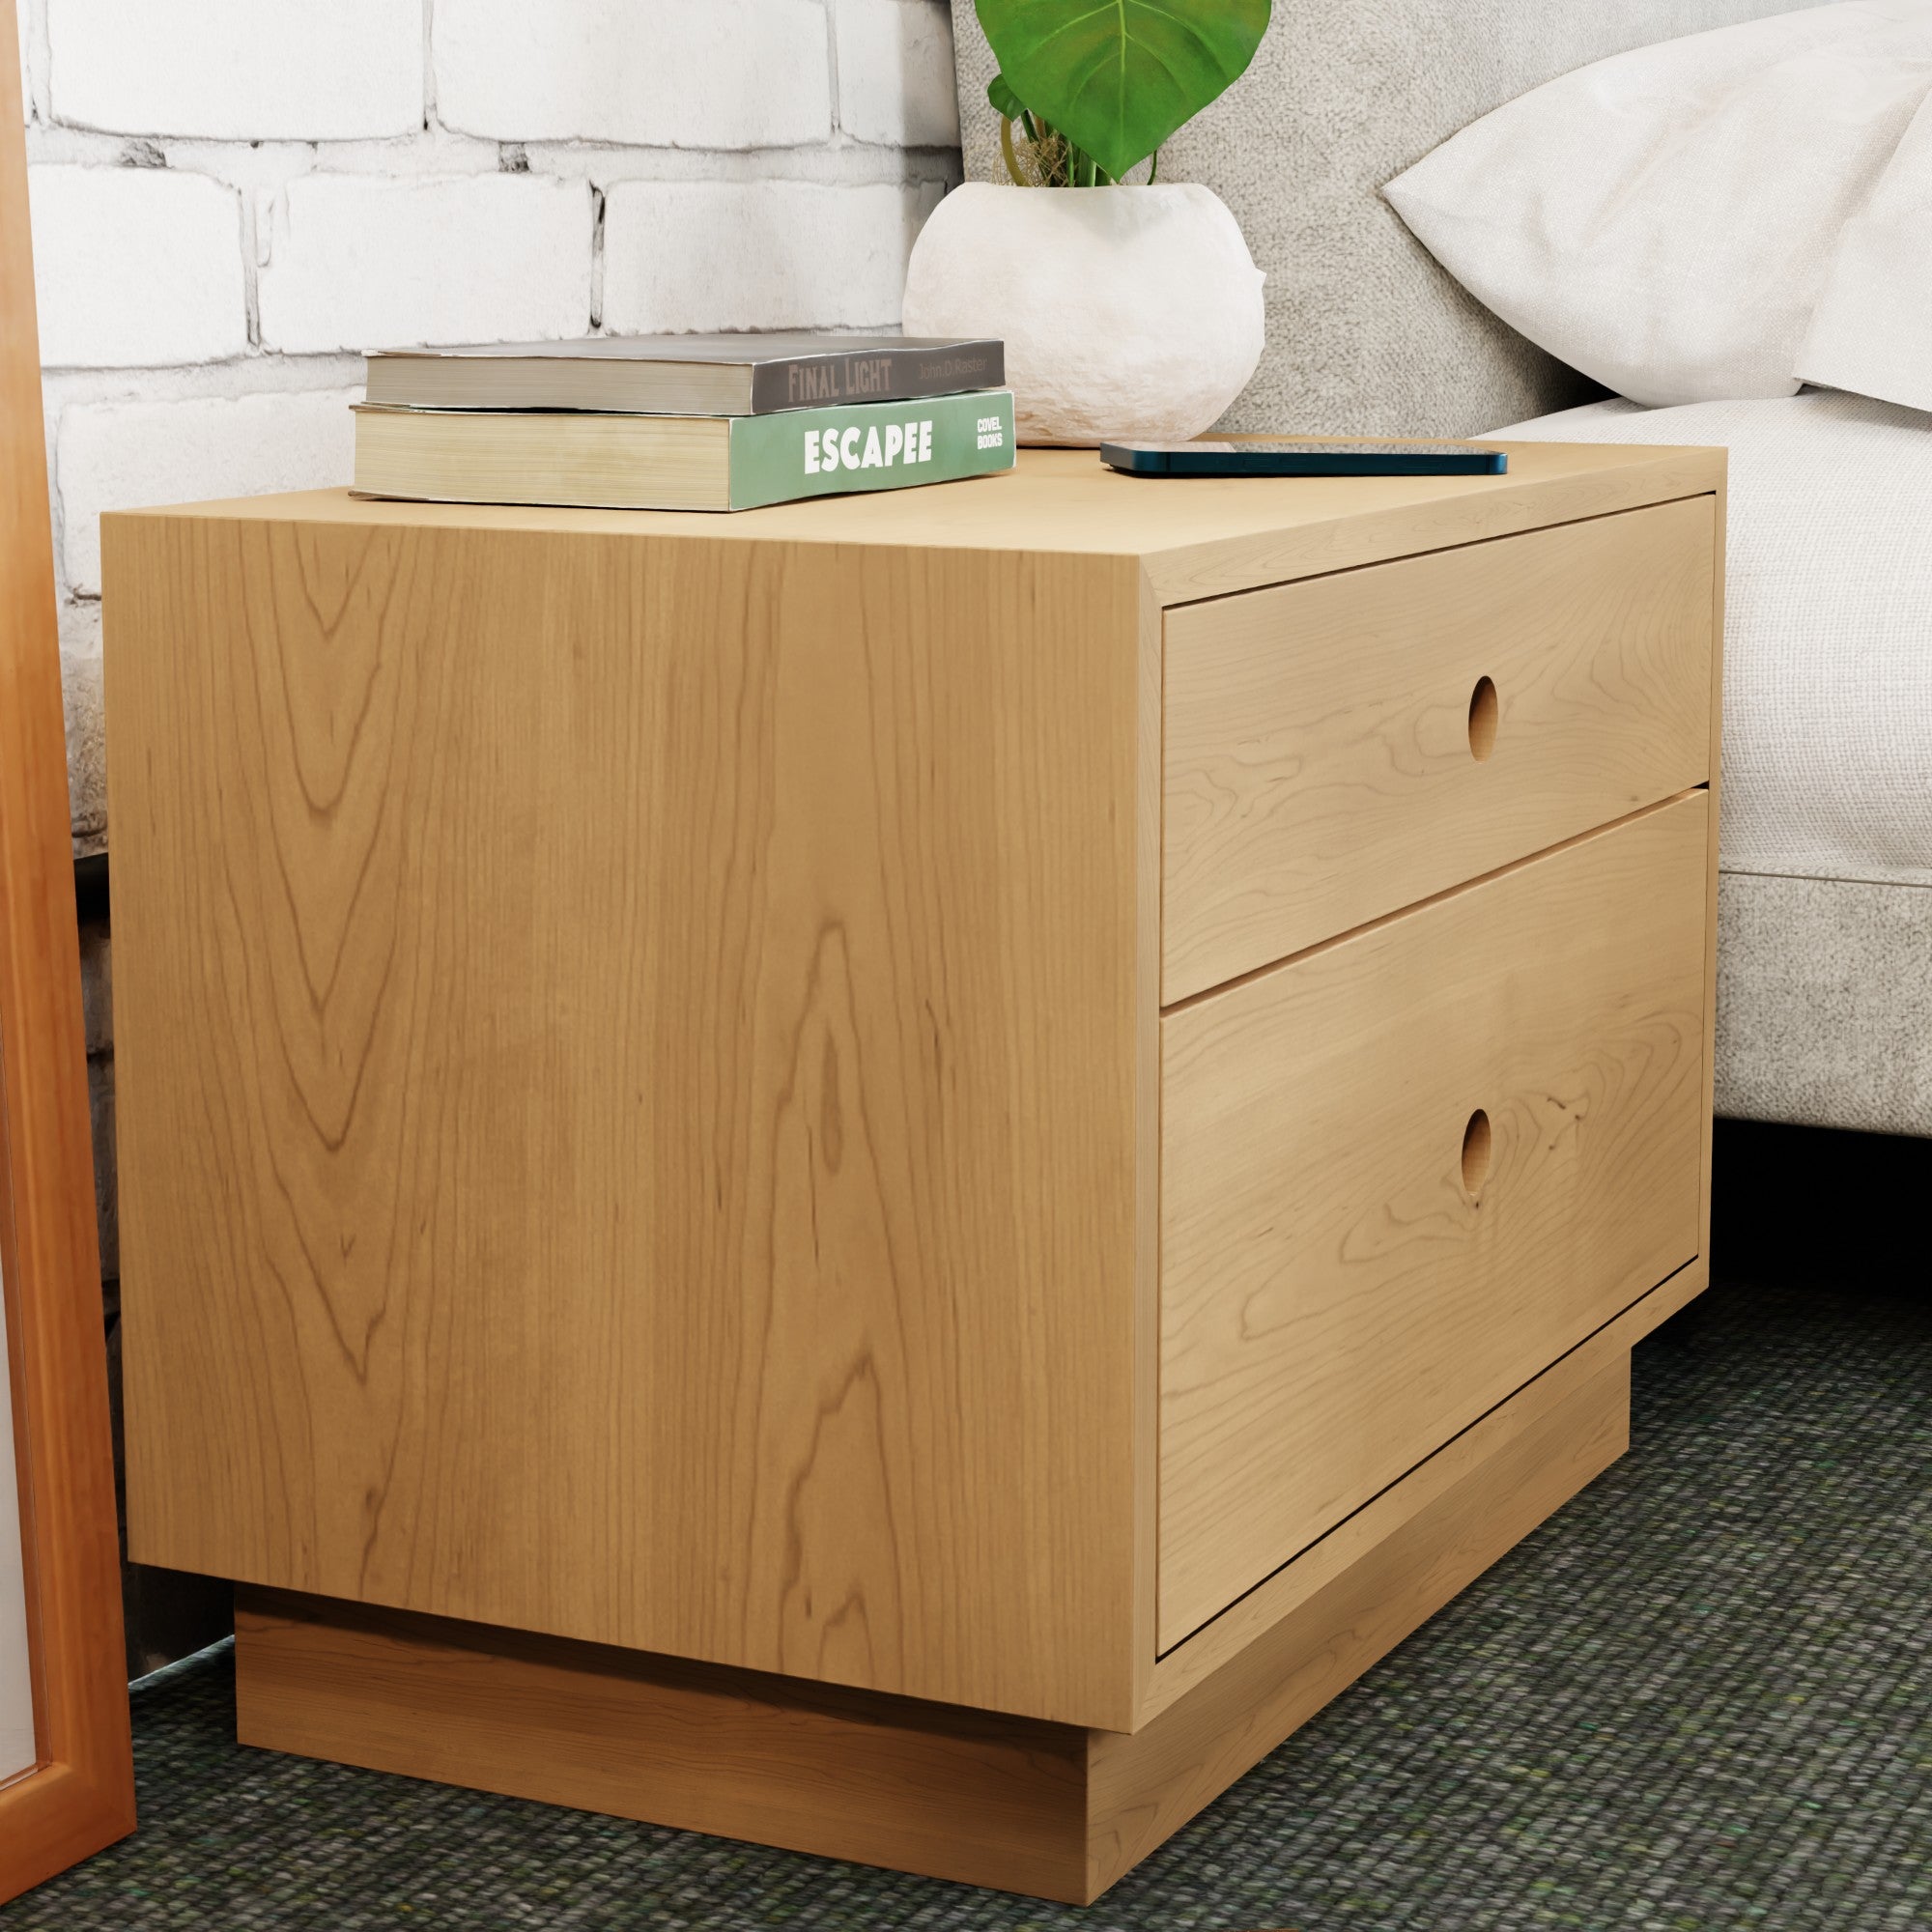 Floating Nightstands - Handmade in the USA with Real Hardwood